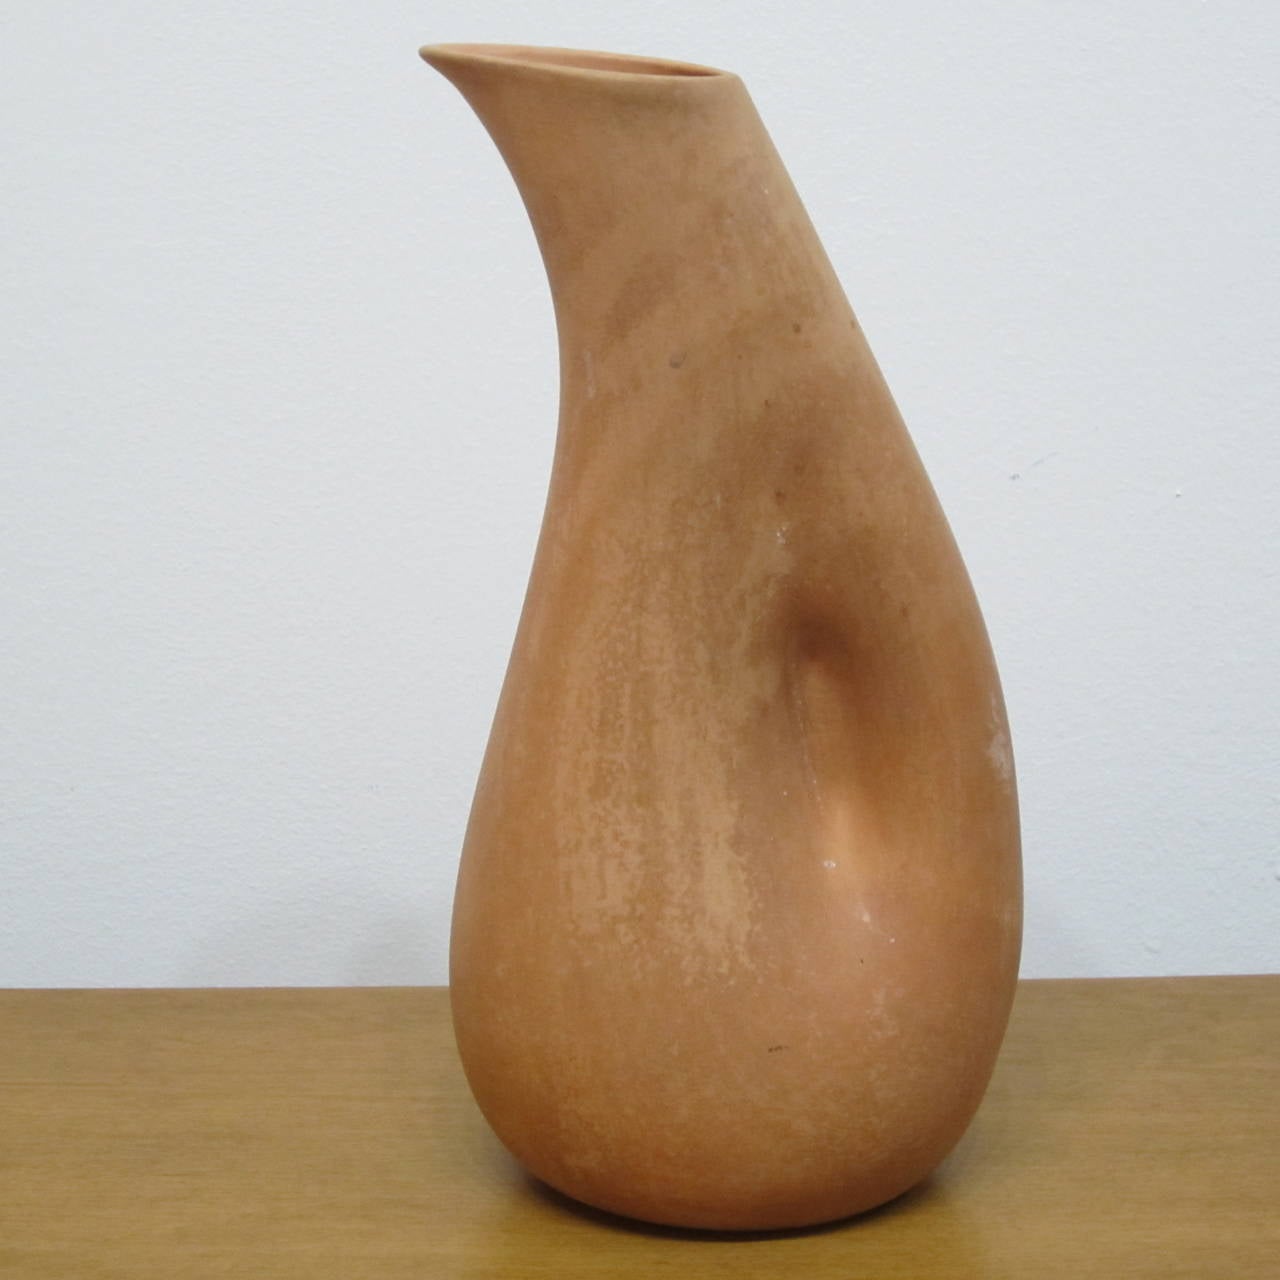 Rare terra cotta pitcher designed by Elsa Peretti for Tiffany & Co. 
Contrast interior glazing with flat finished exterior. Made in Italy marked and signed on bottom.
See our Elsa Peretti matching terra cotta bowl on our site.